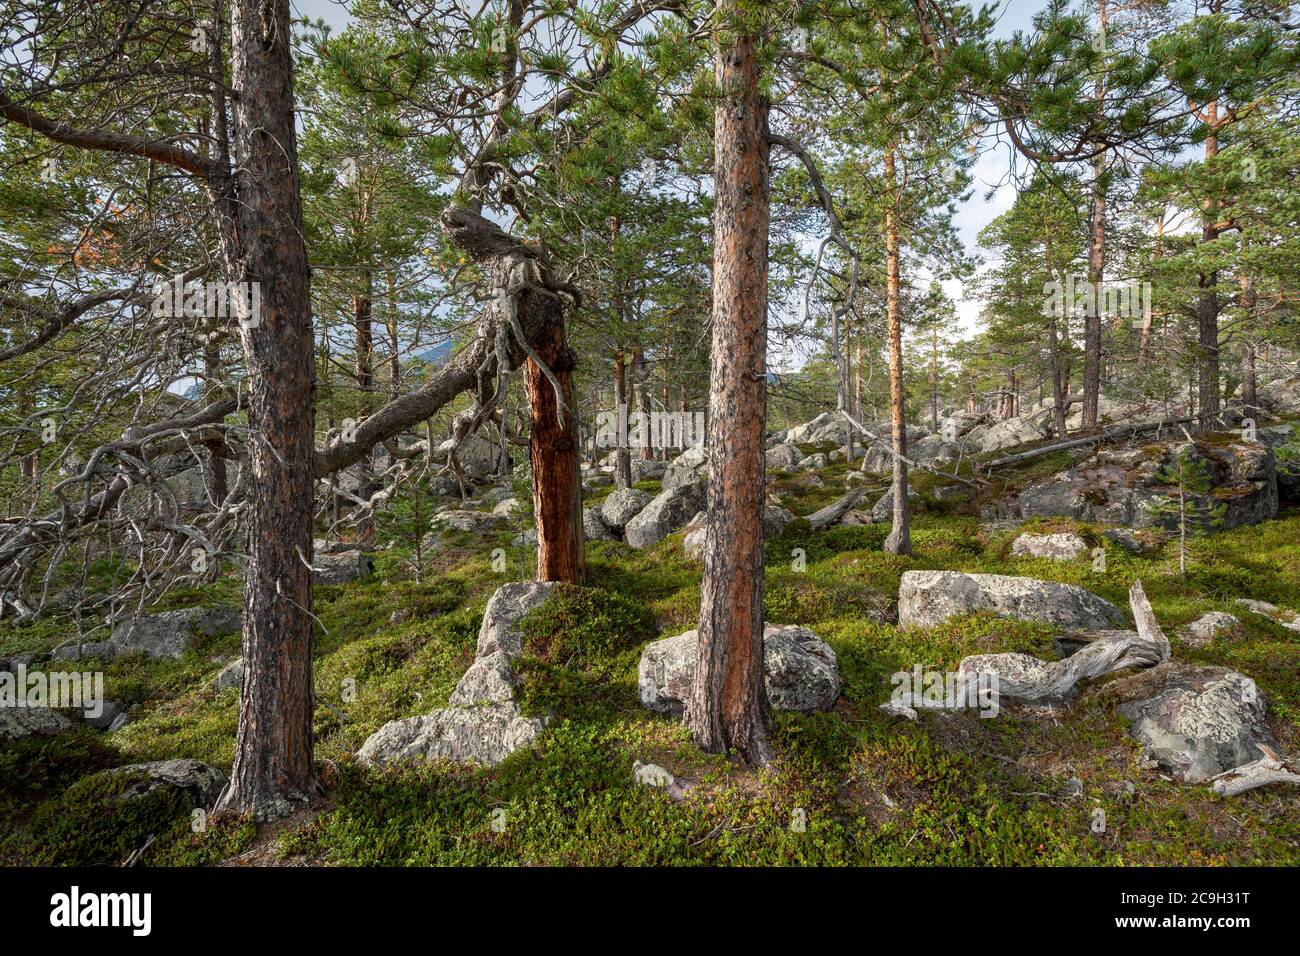 Primeval forest in the Laponia protected area, Gaellivare, Norrbottens laen, Sweden Stock Photo